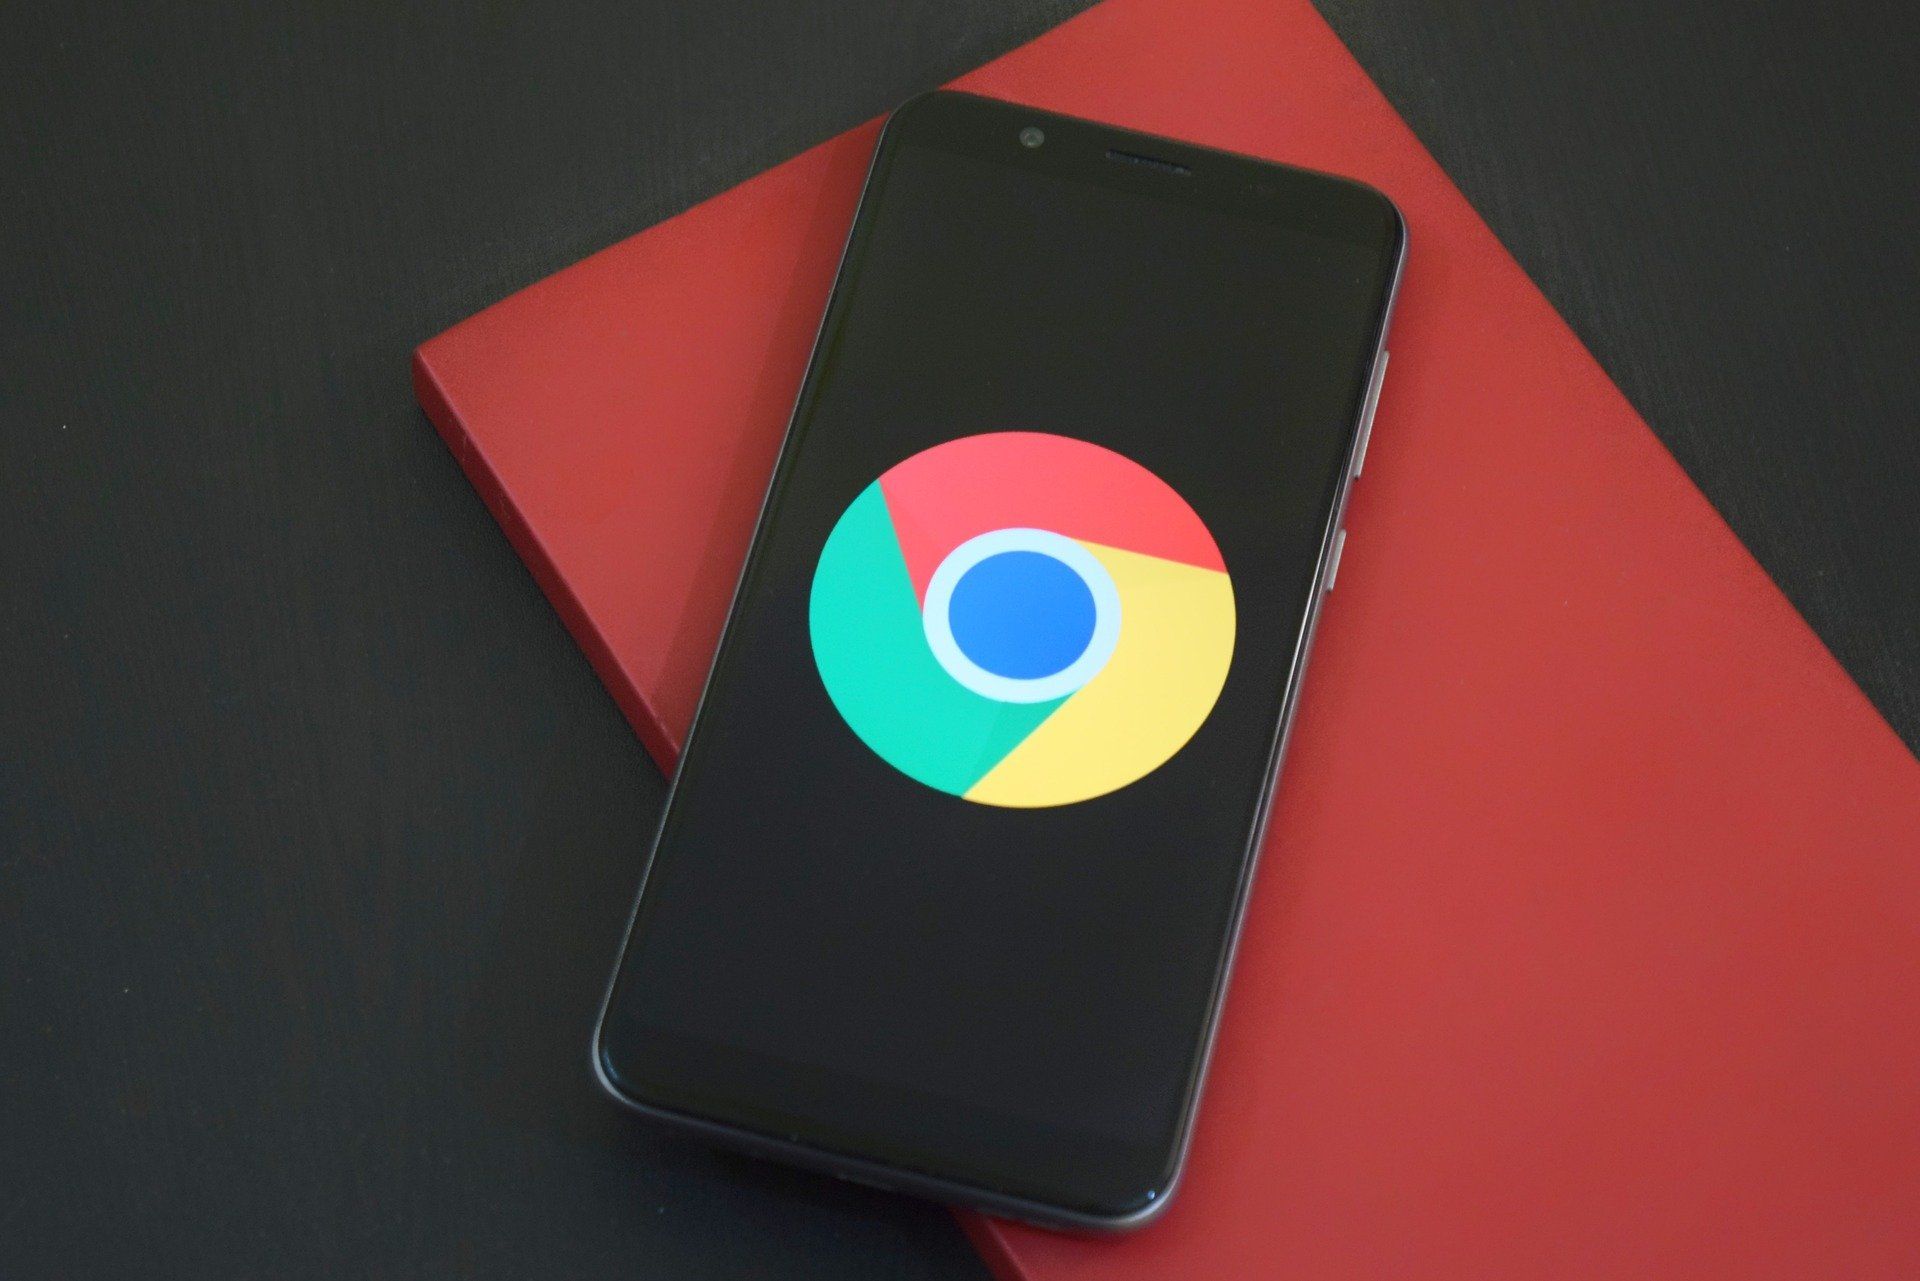 Google issues new fix for major Chrome security exploit: How to update